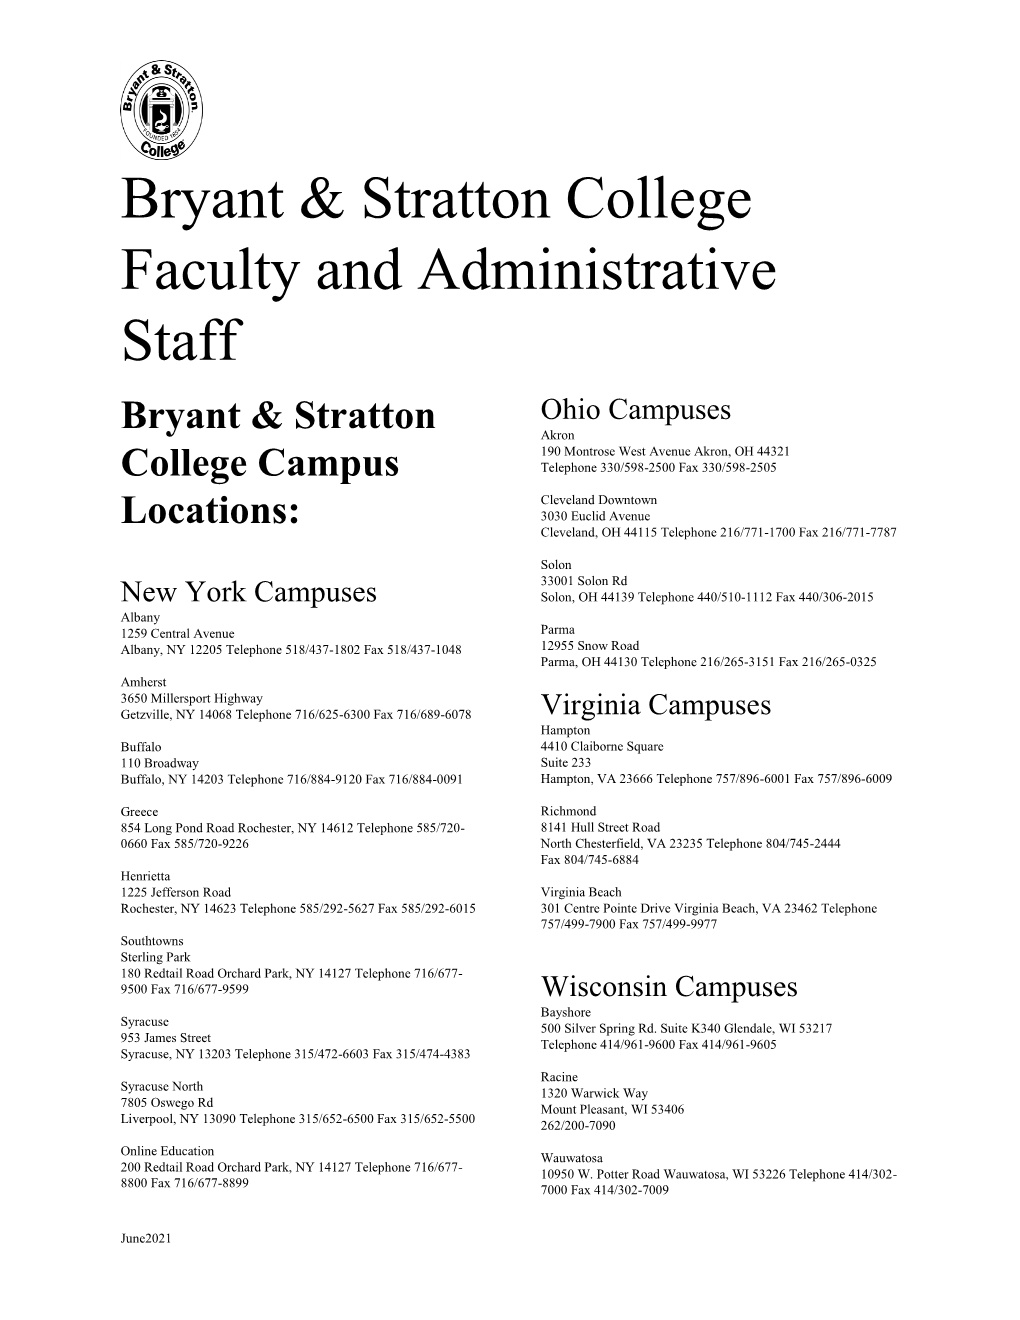 Bryant & Stratton College Faculty and Administrative Staff